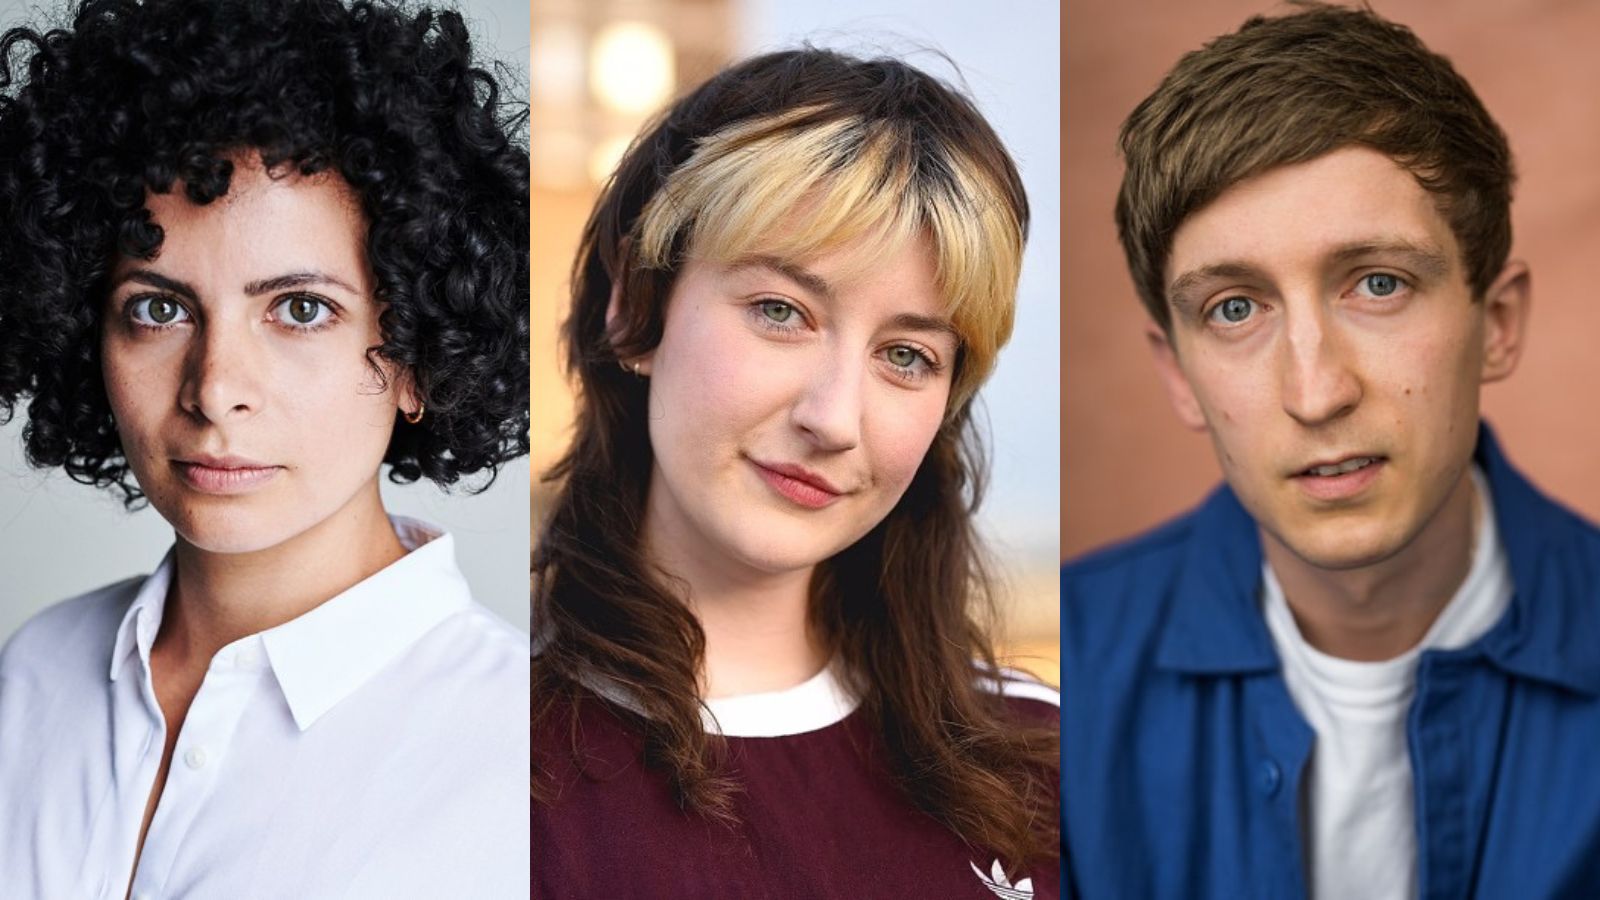 Headshots for the cast of Northanger Abbey. From left to right: Rebecca Banatvala, AK Golding, Sam Newton